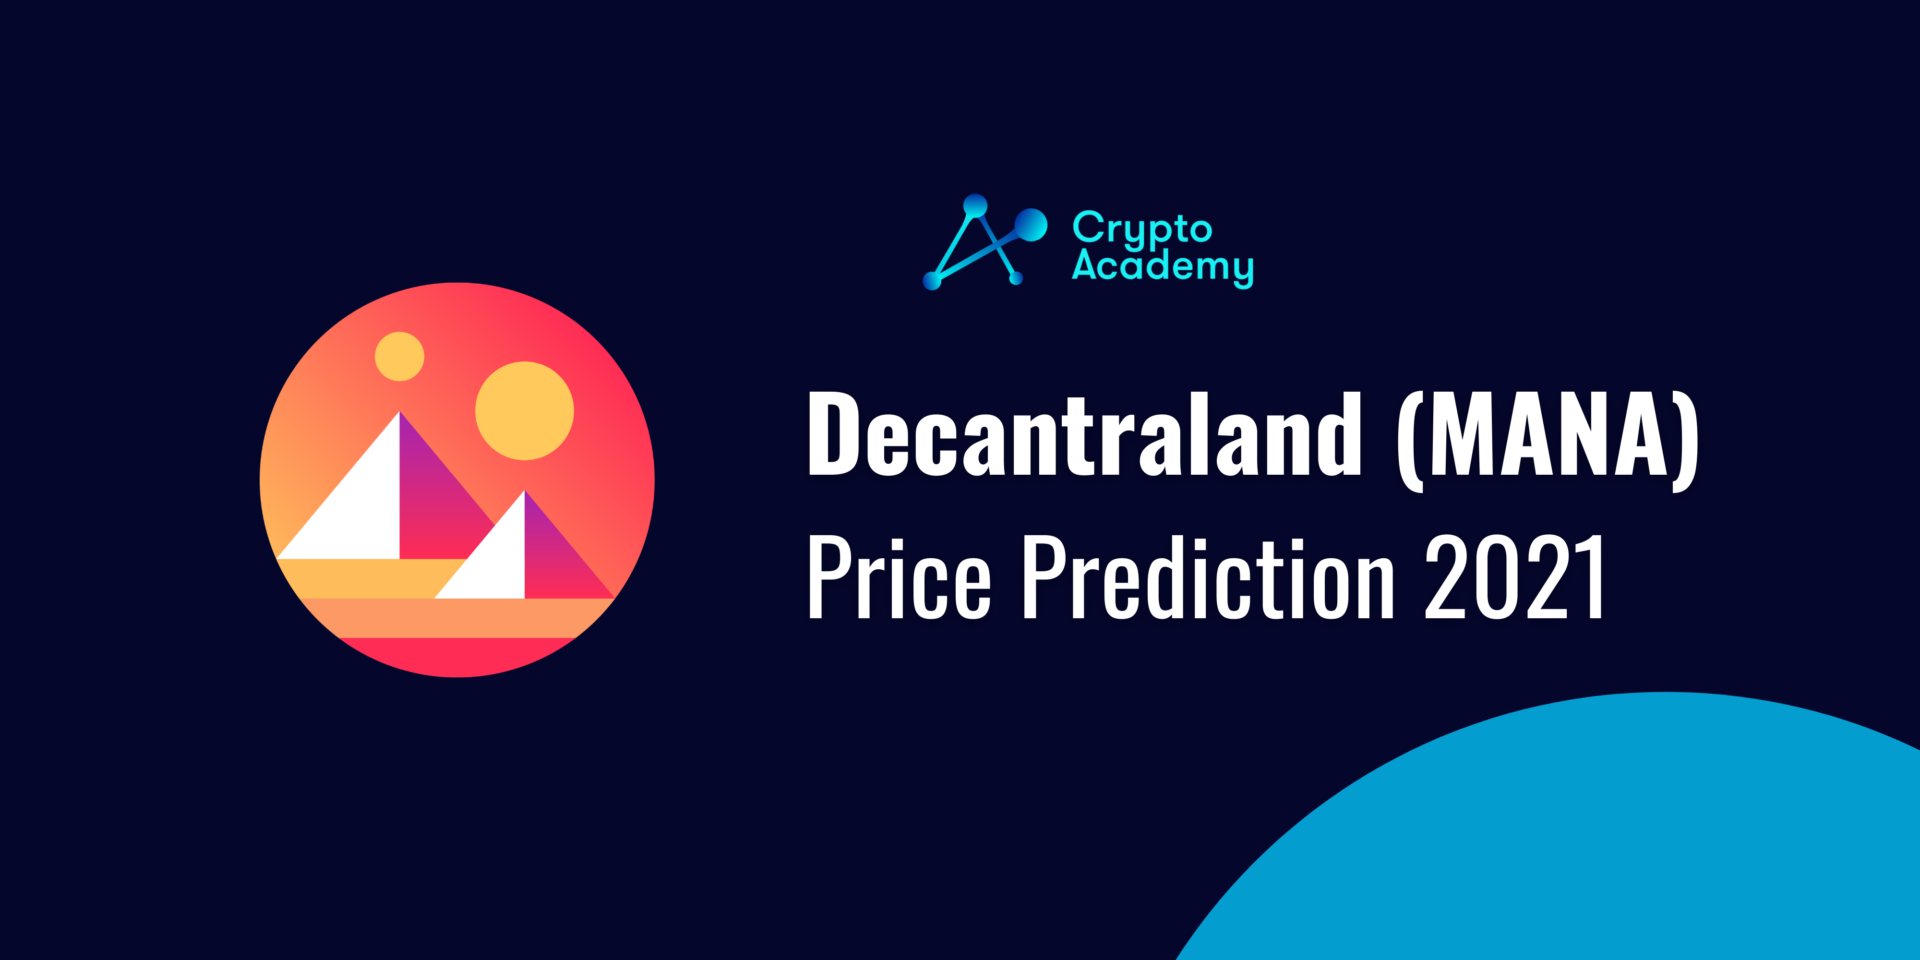 Decentraland Price Prediction 2021 and Beyond - Is MANA a Good Investment?